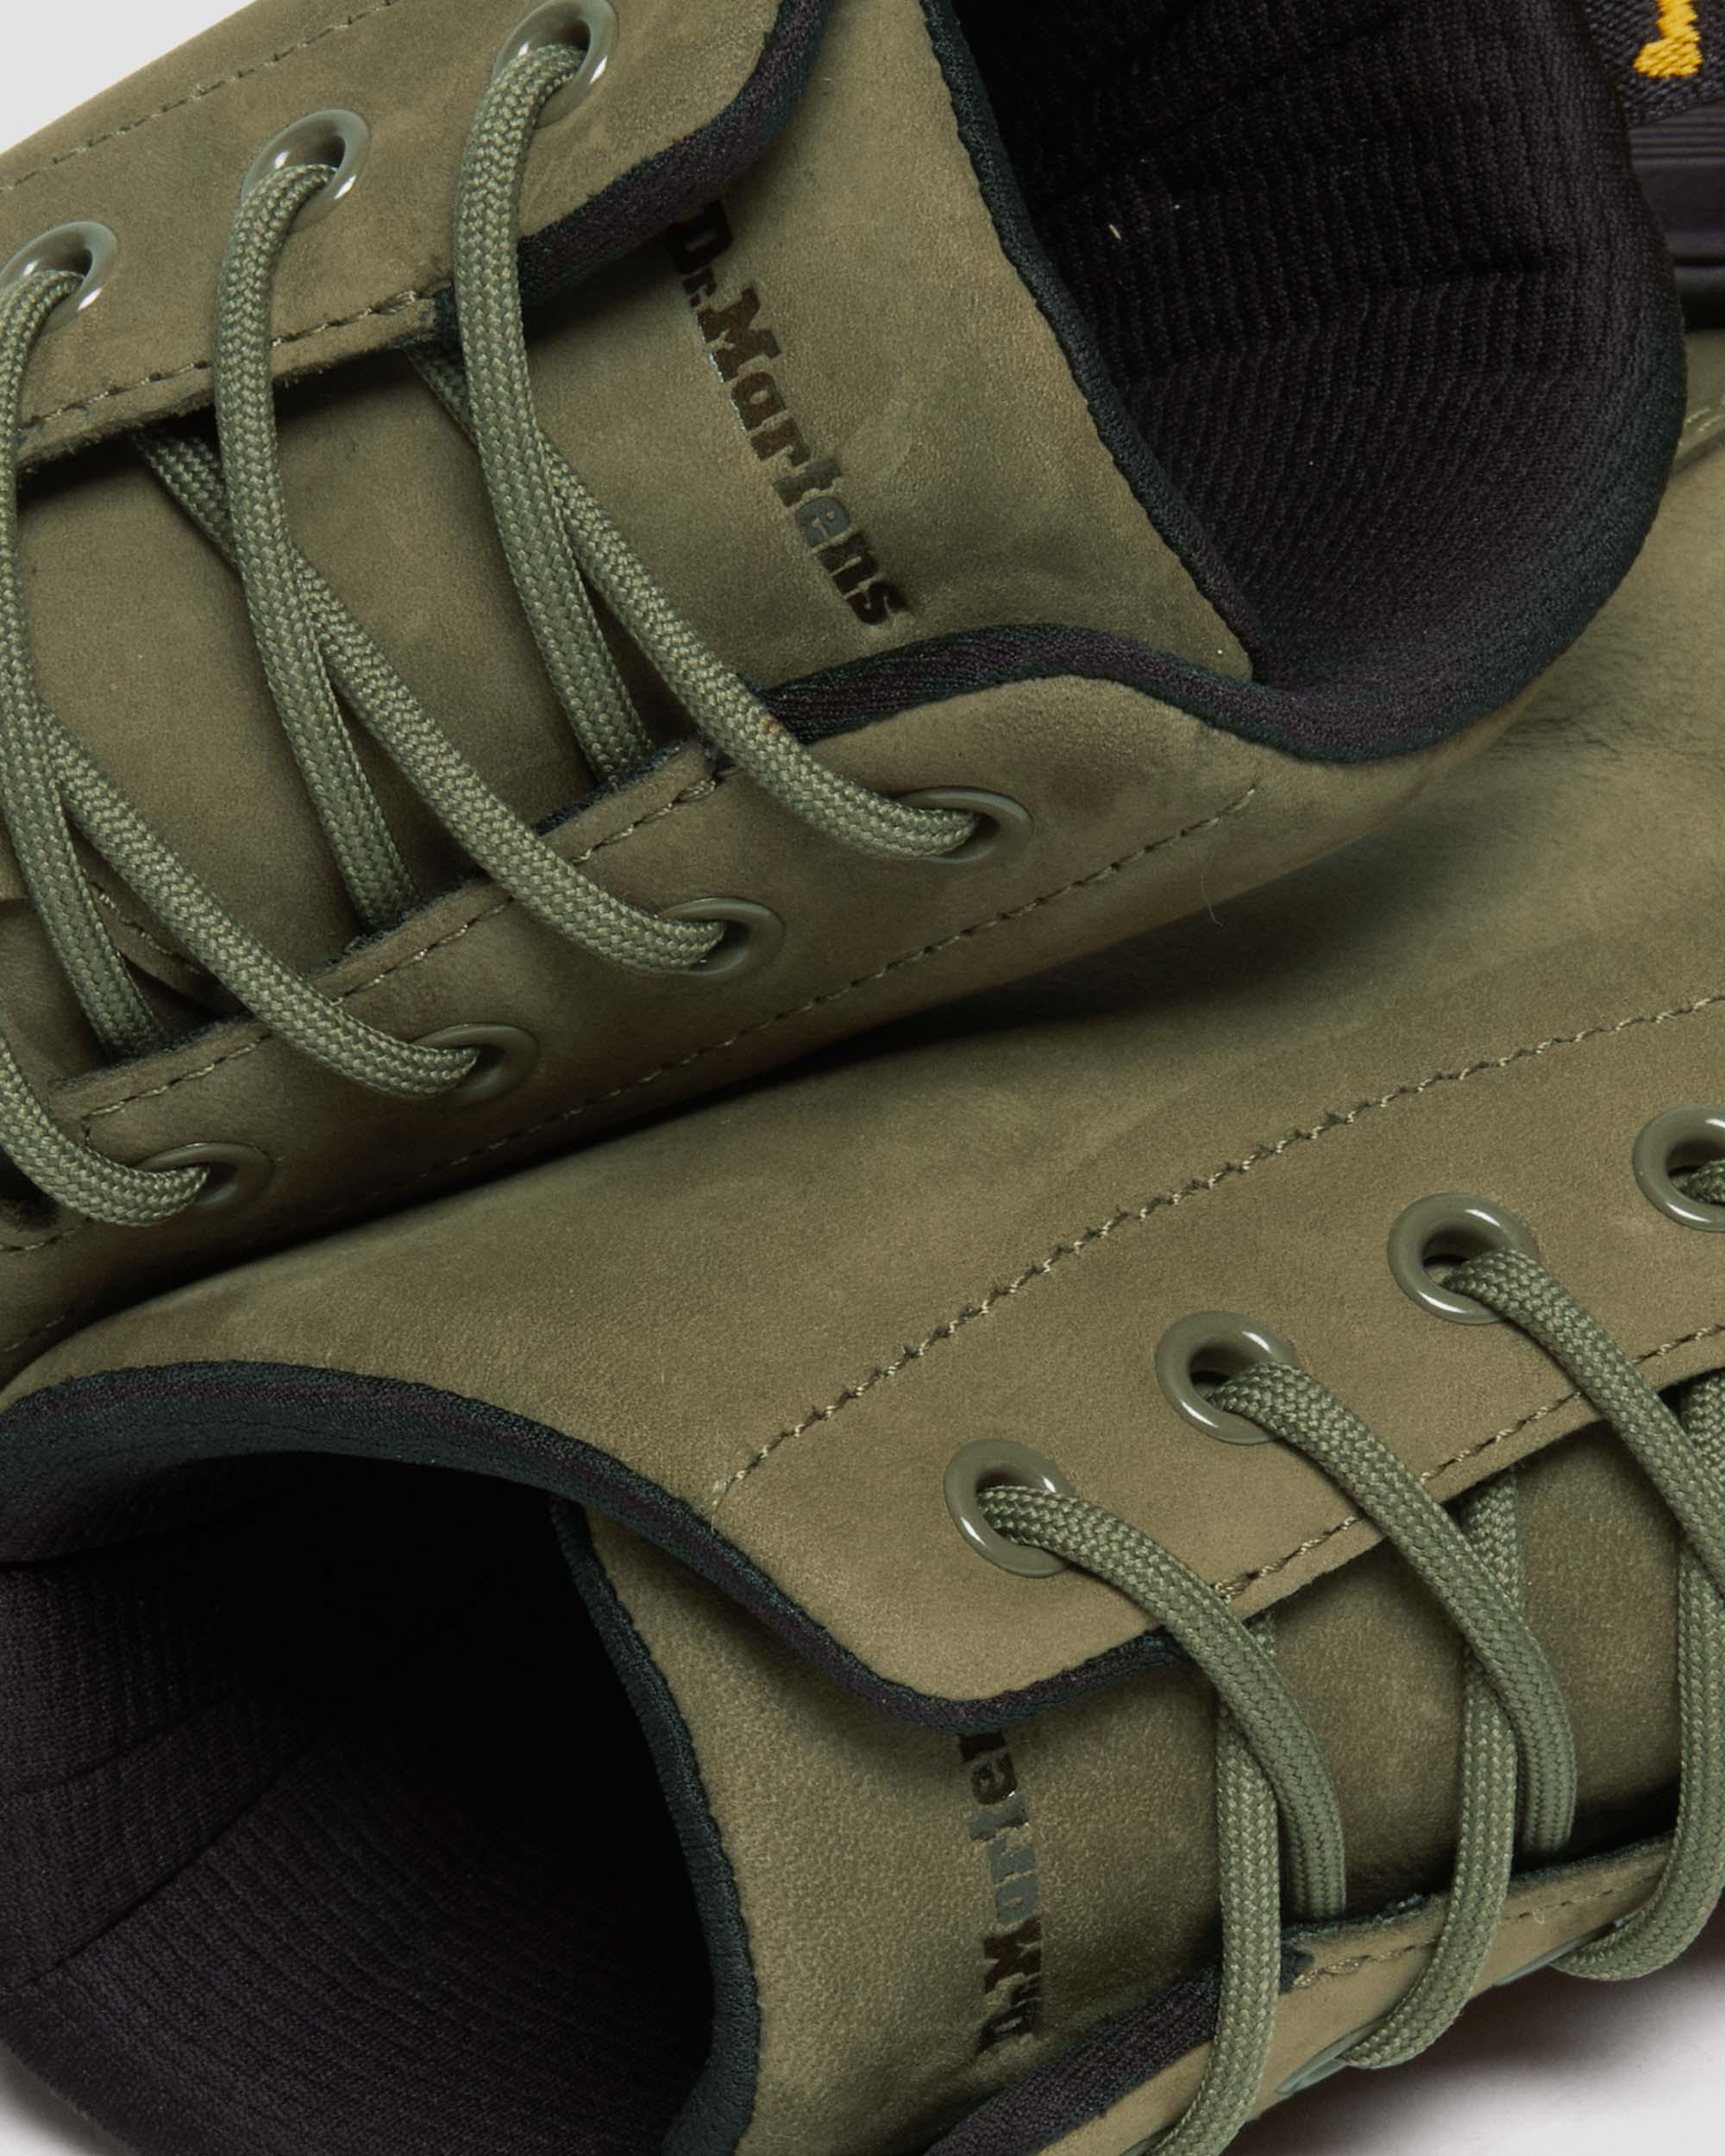 Crewson Leather Lace Up Boots in DMS OLIVE